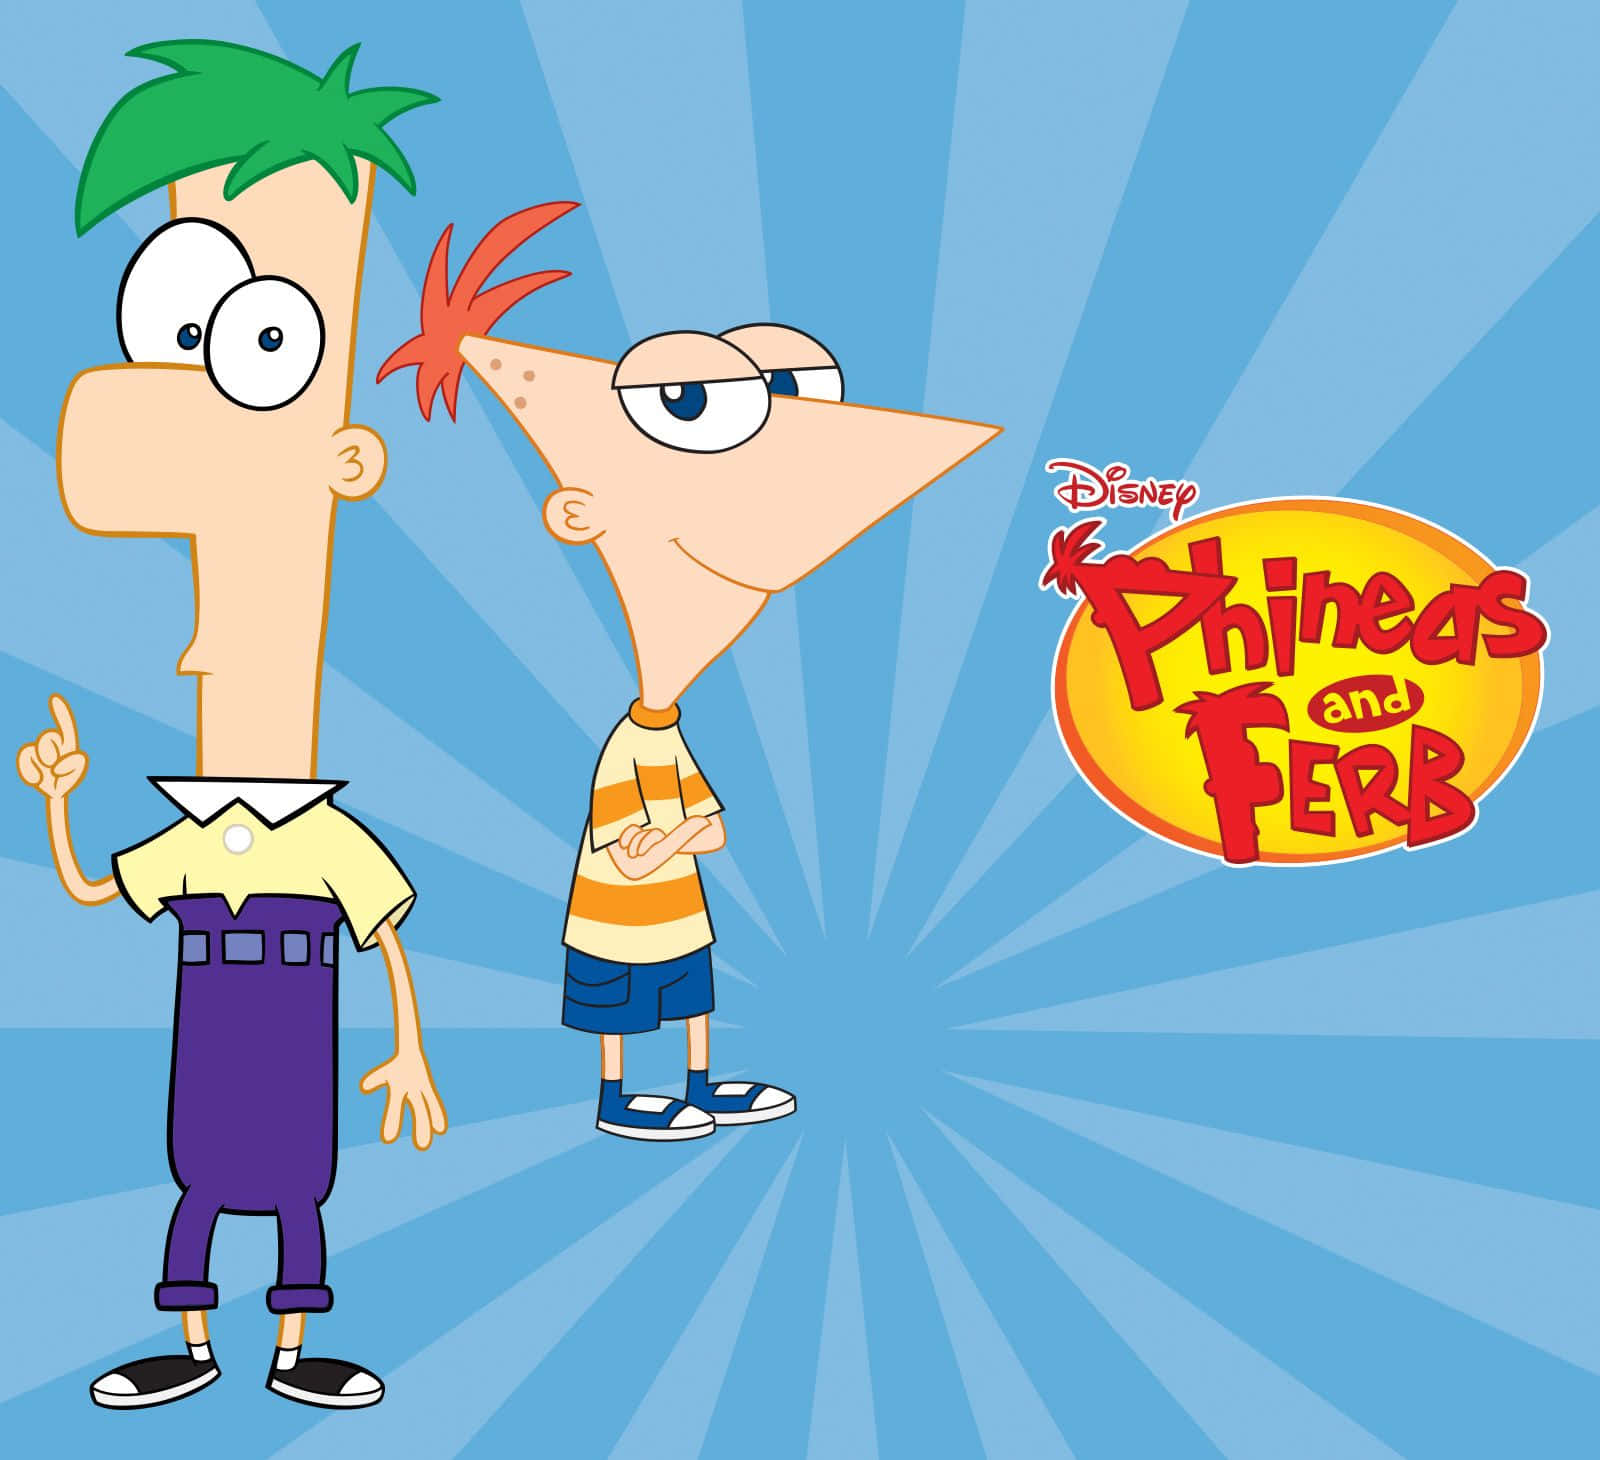 Phineas and Ferb enjoying a fun adventure together.